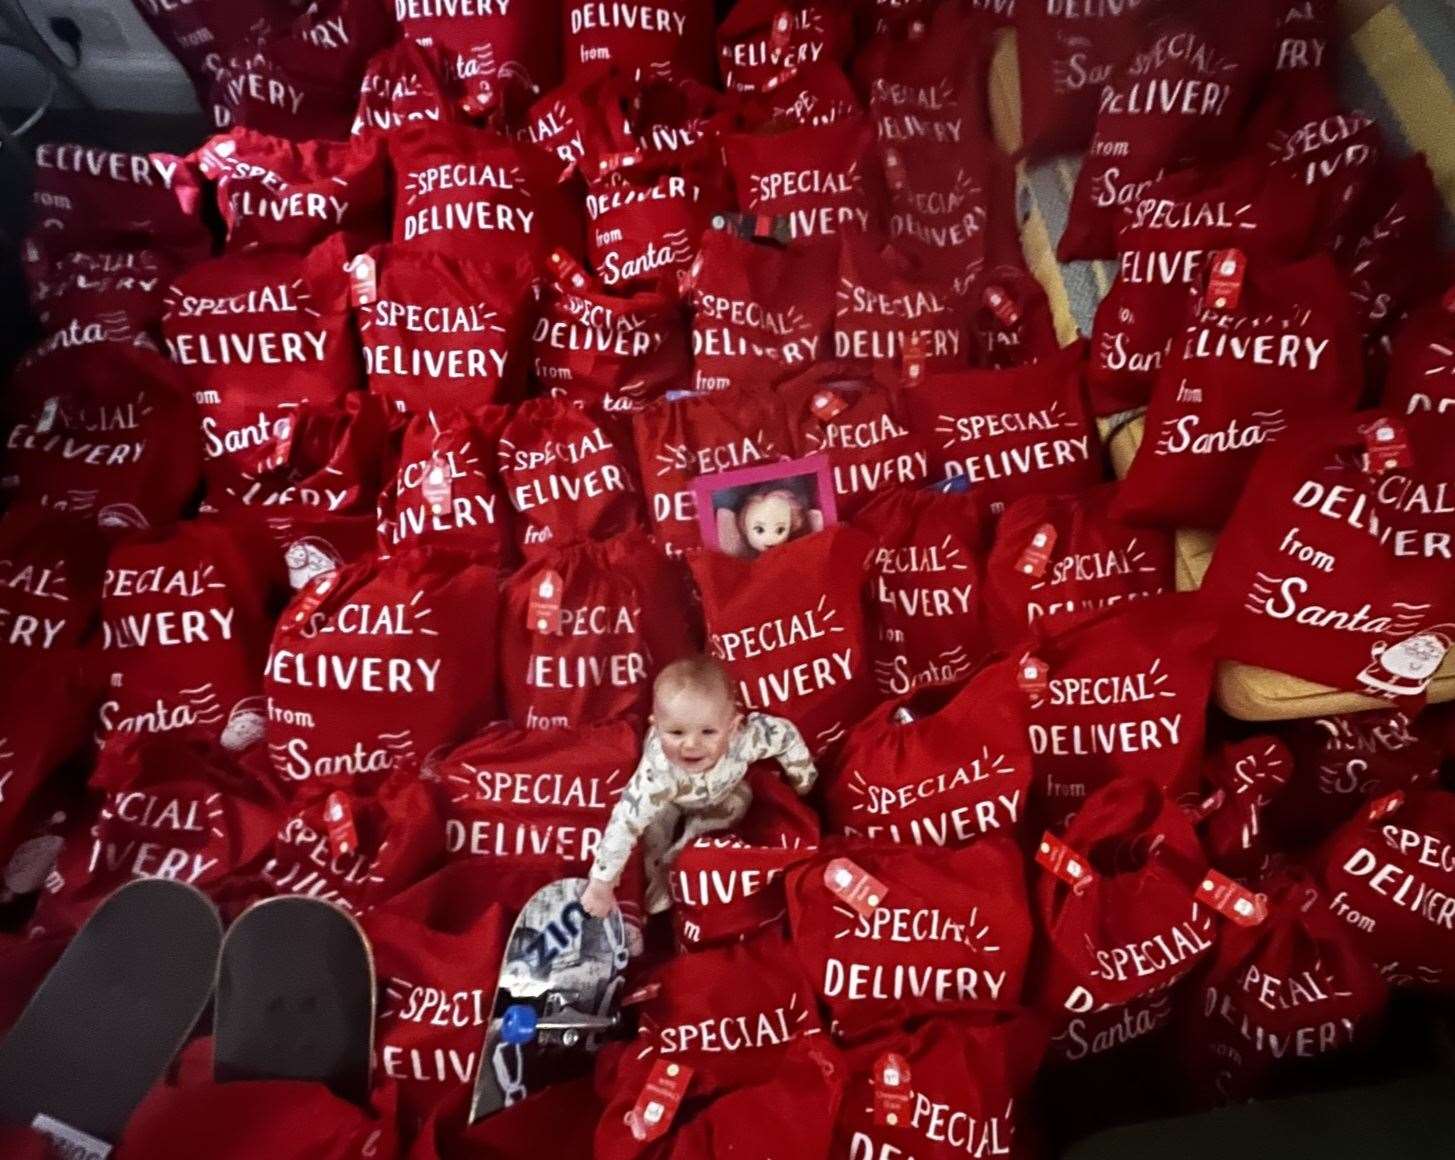 Cia Merrall's baby Fin has been helping get 100 Christmas stockings ready to deliver to children in need